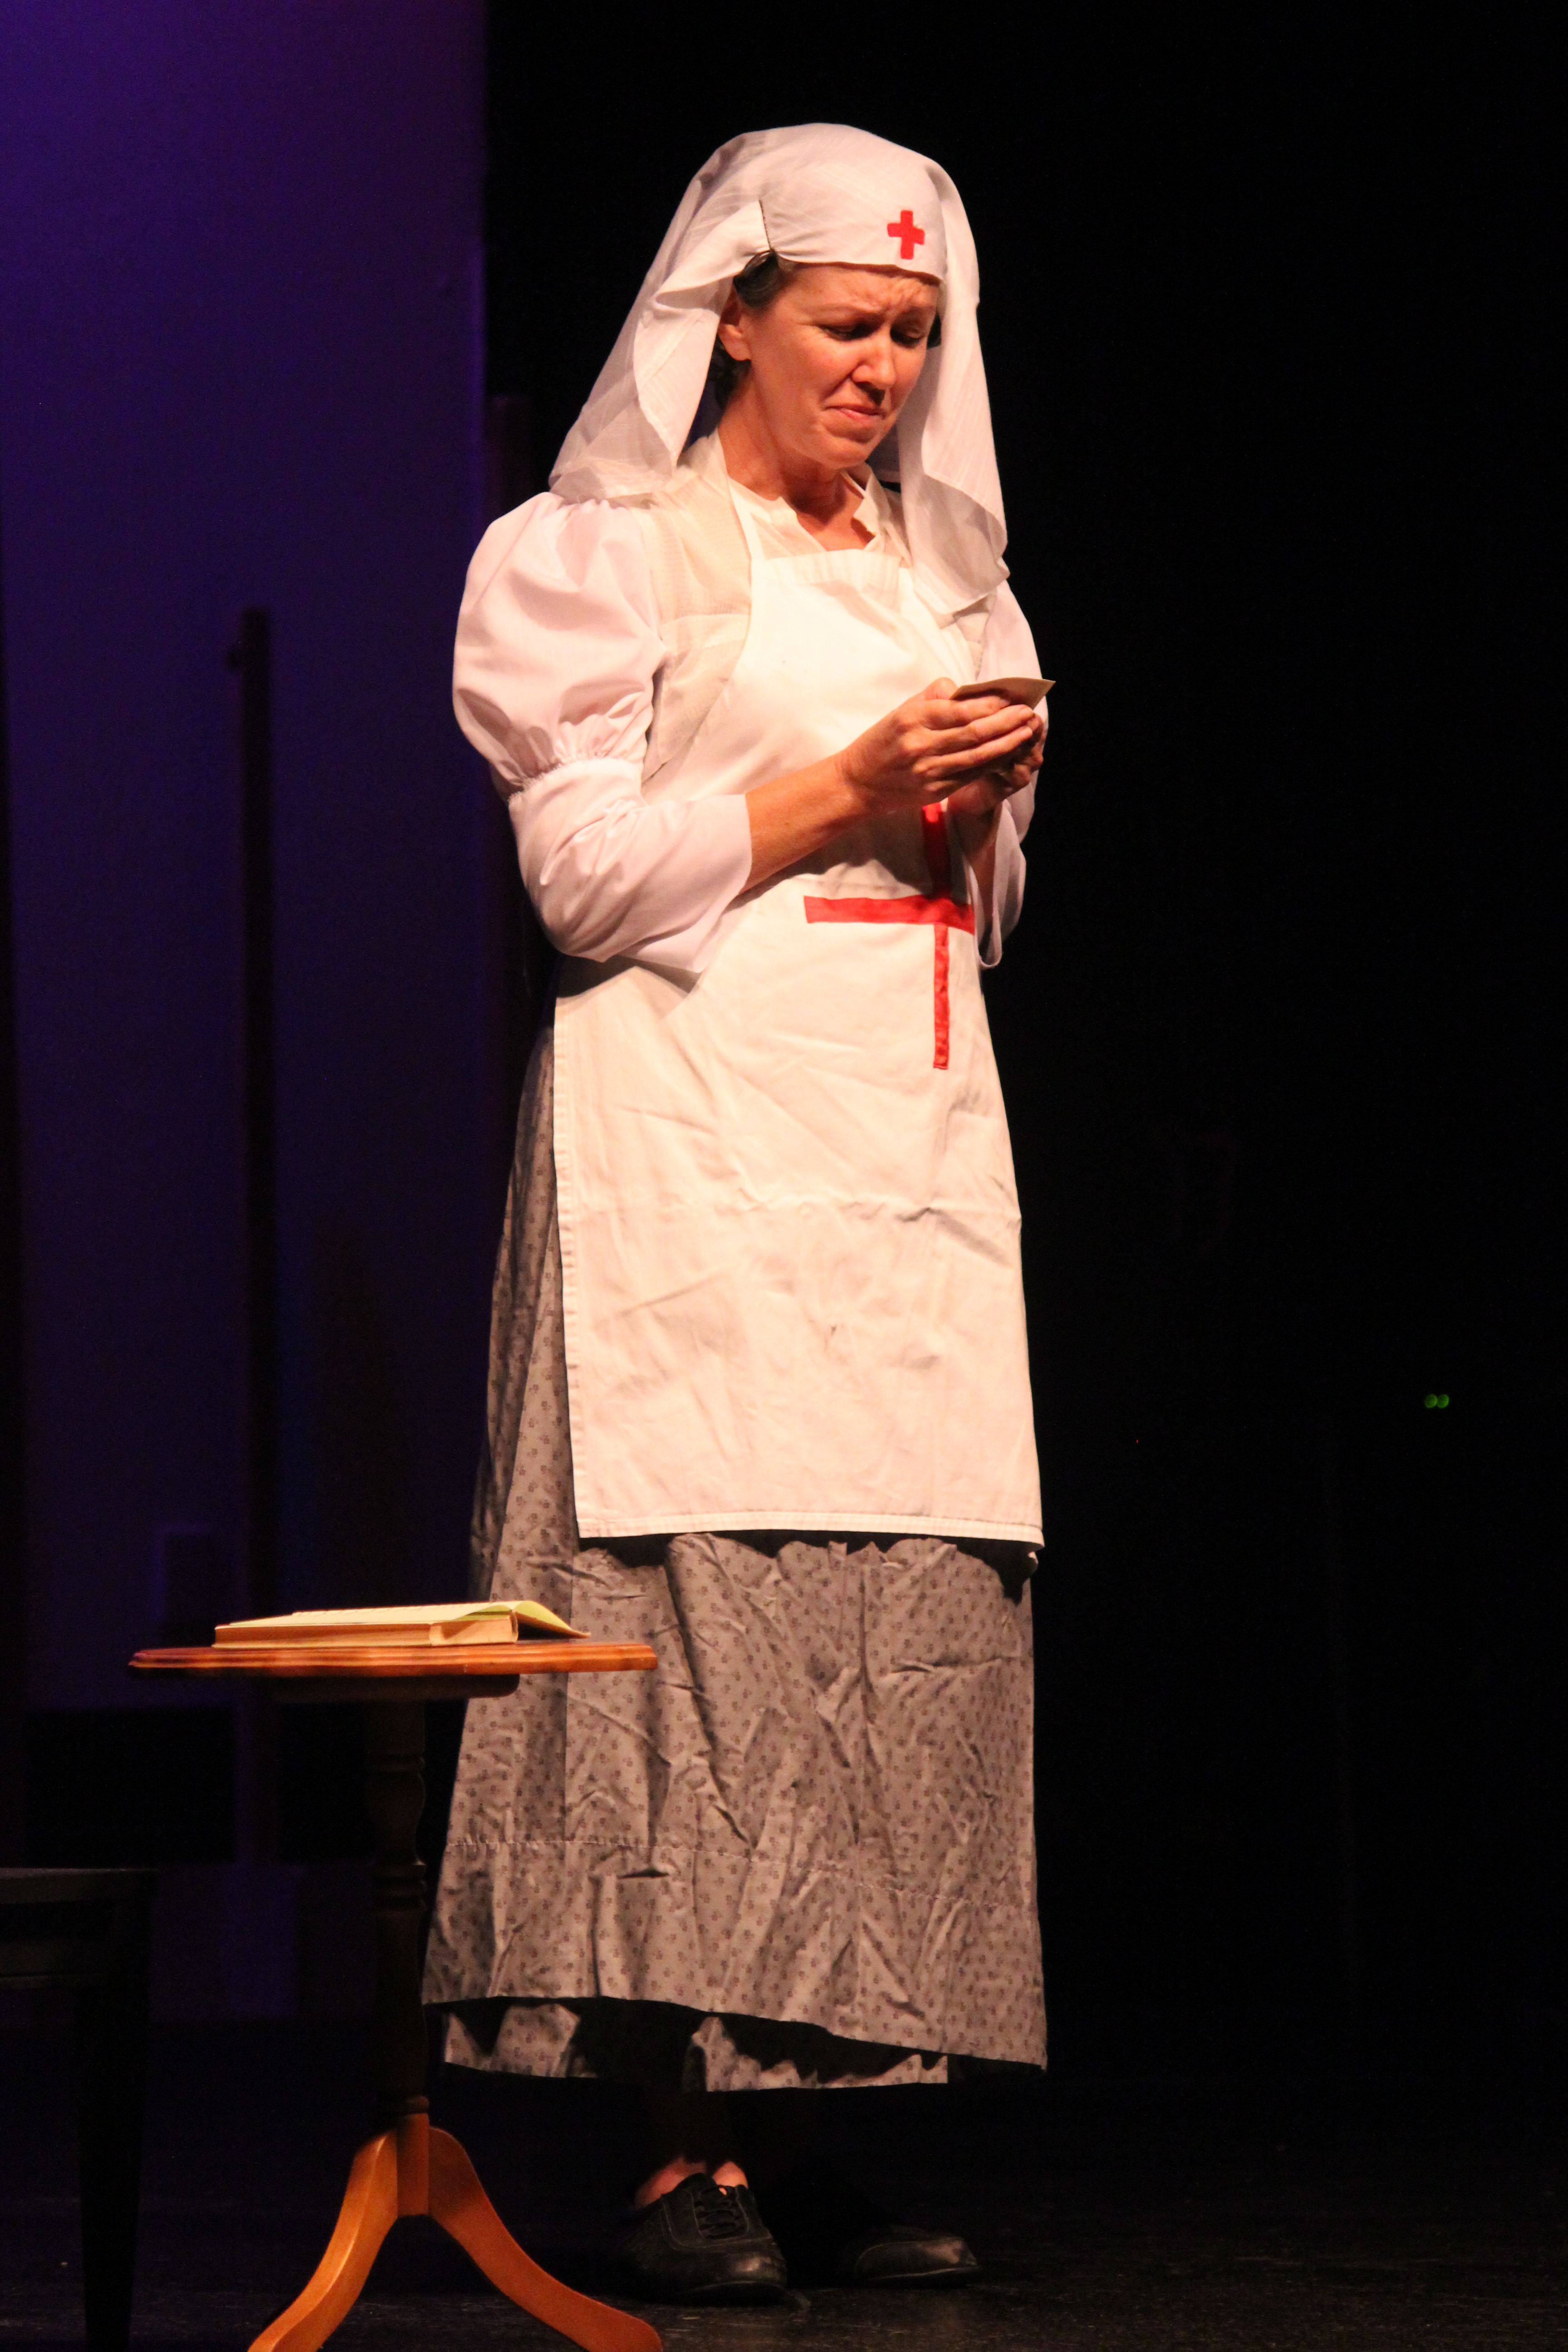 Marcia performed a moving monologue from a WWI nurse